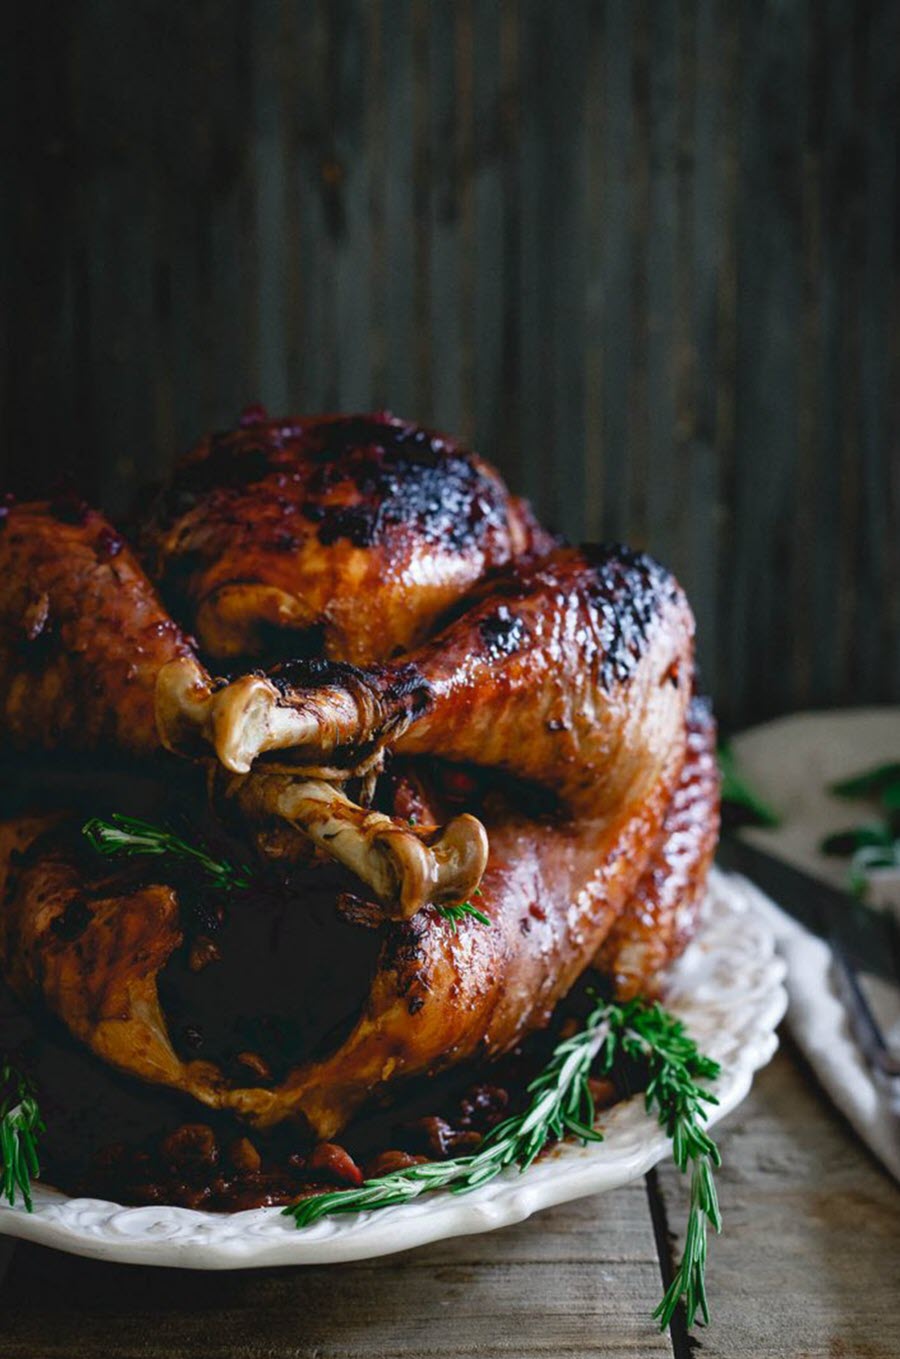 Holiday Christmas Wine Pairings for Every Meal - What wine goes with Turkey